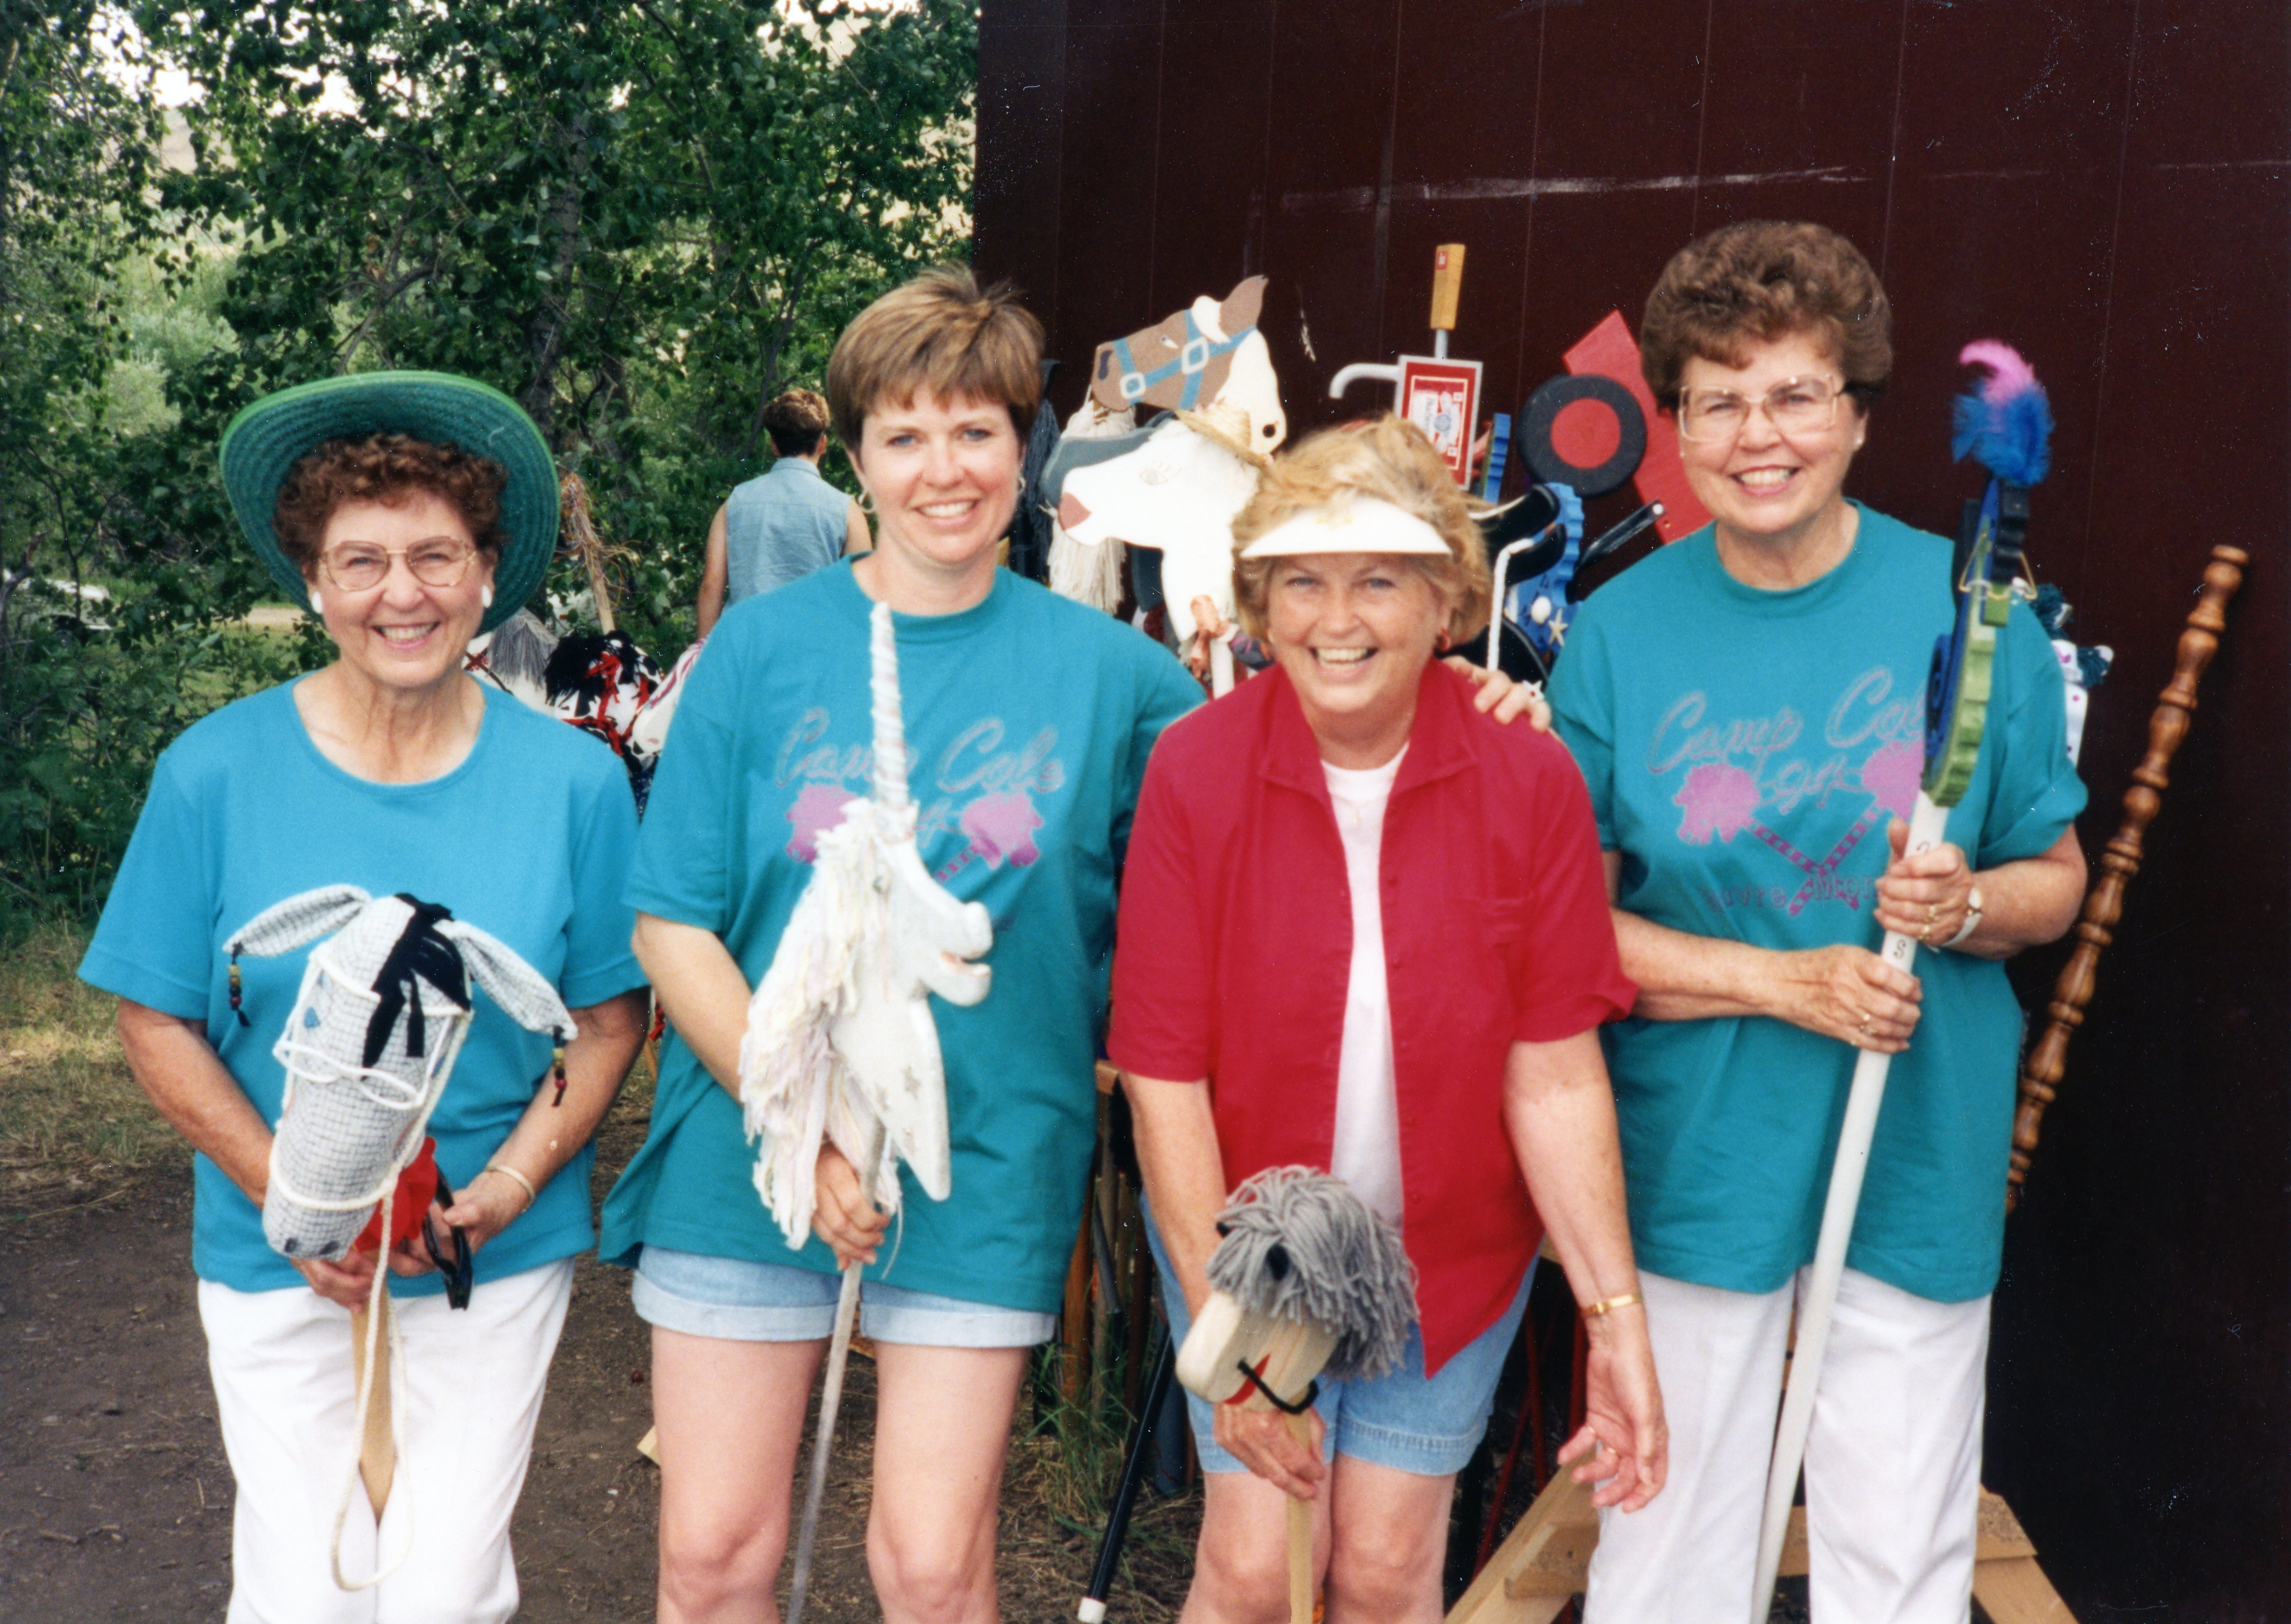 Thelma McLain, Linda Fossen, Lois Waller and Della Pimley ride their horses during Camp Cole in the Bear Paws in 1994